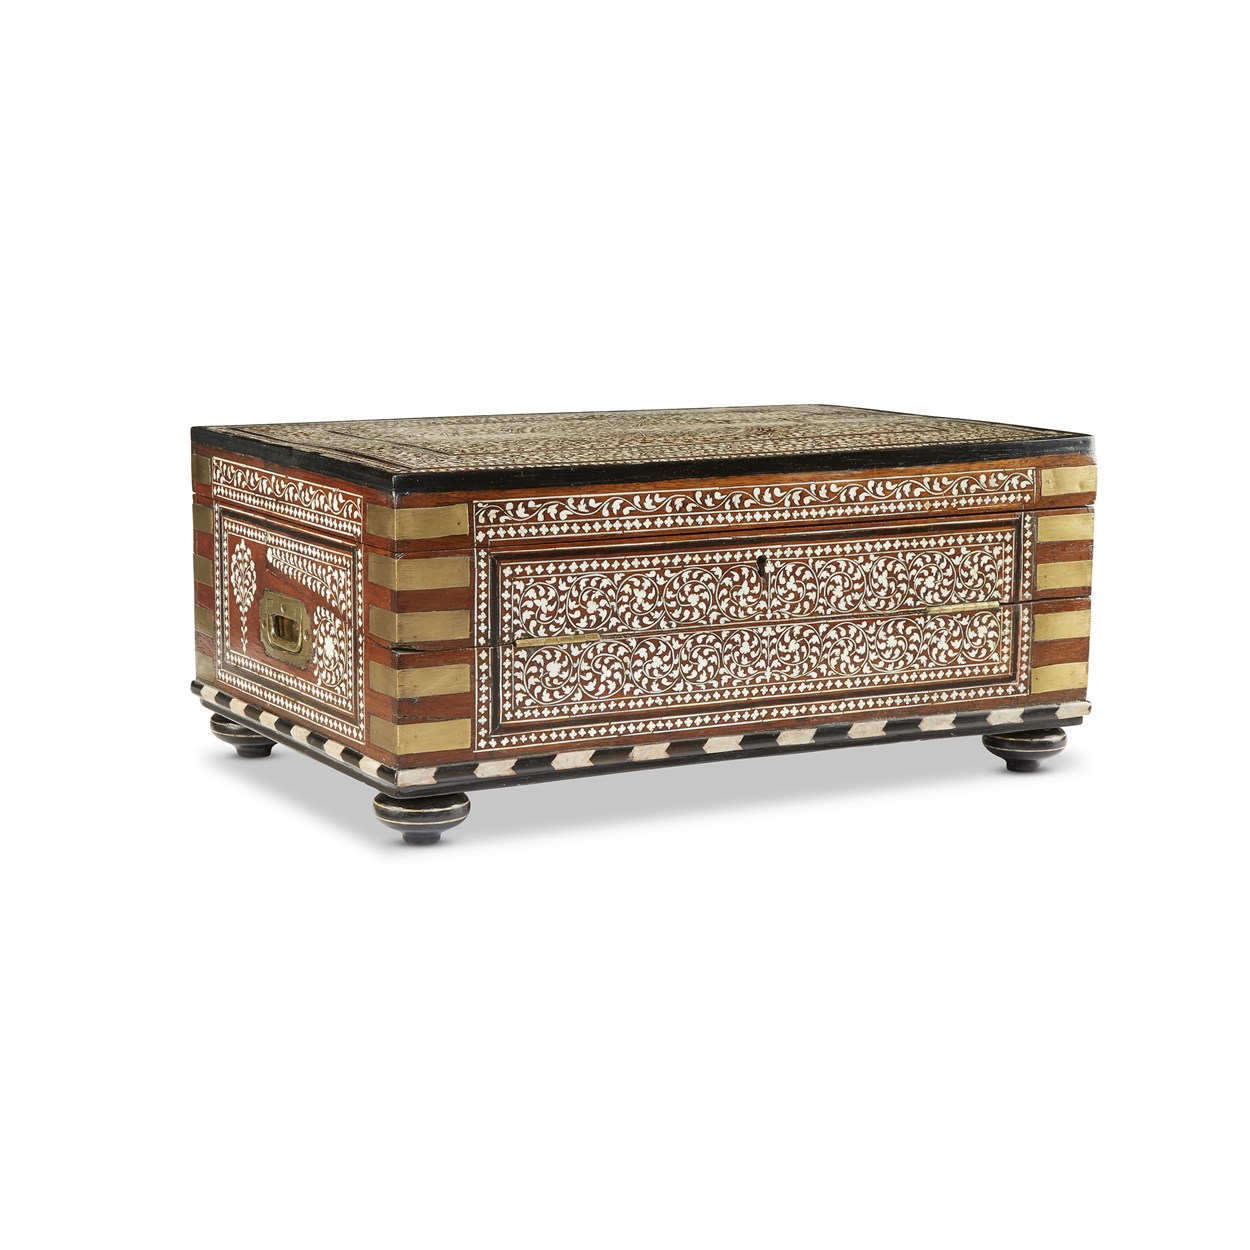 Lot 143 - An Anglo-Indian ivory-inlaid hardwood travelling desk